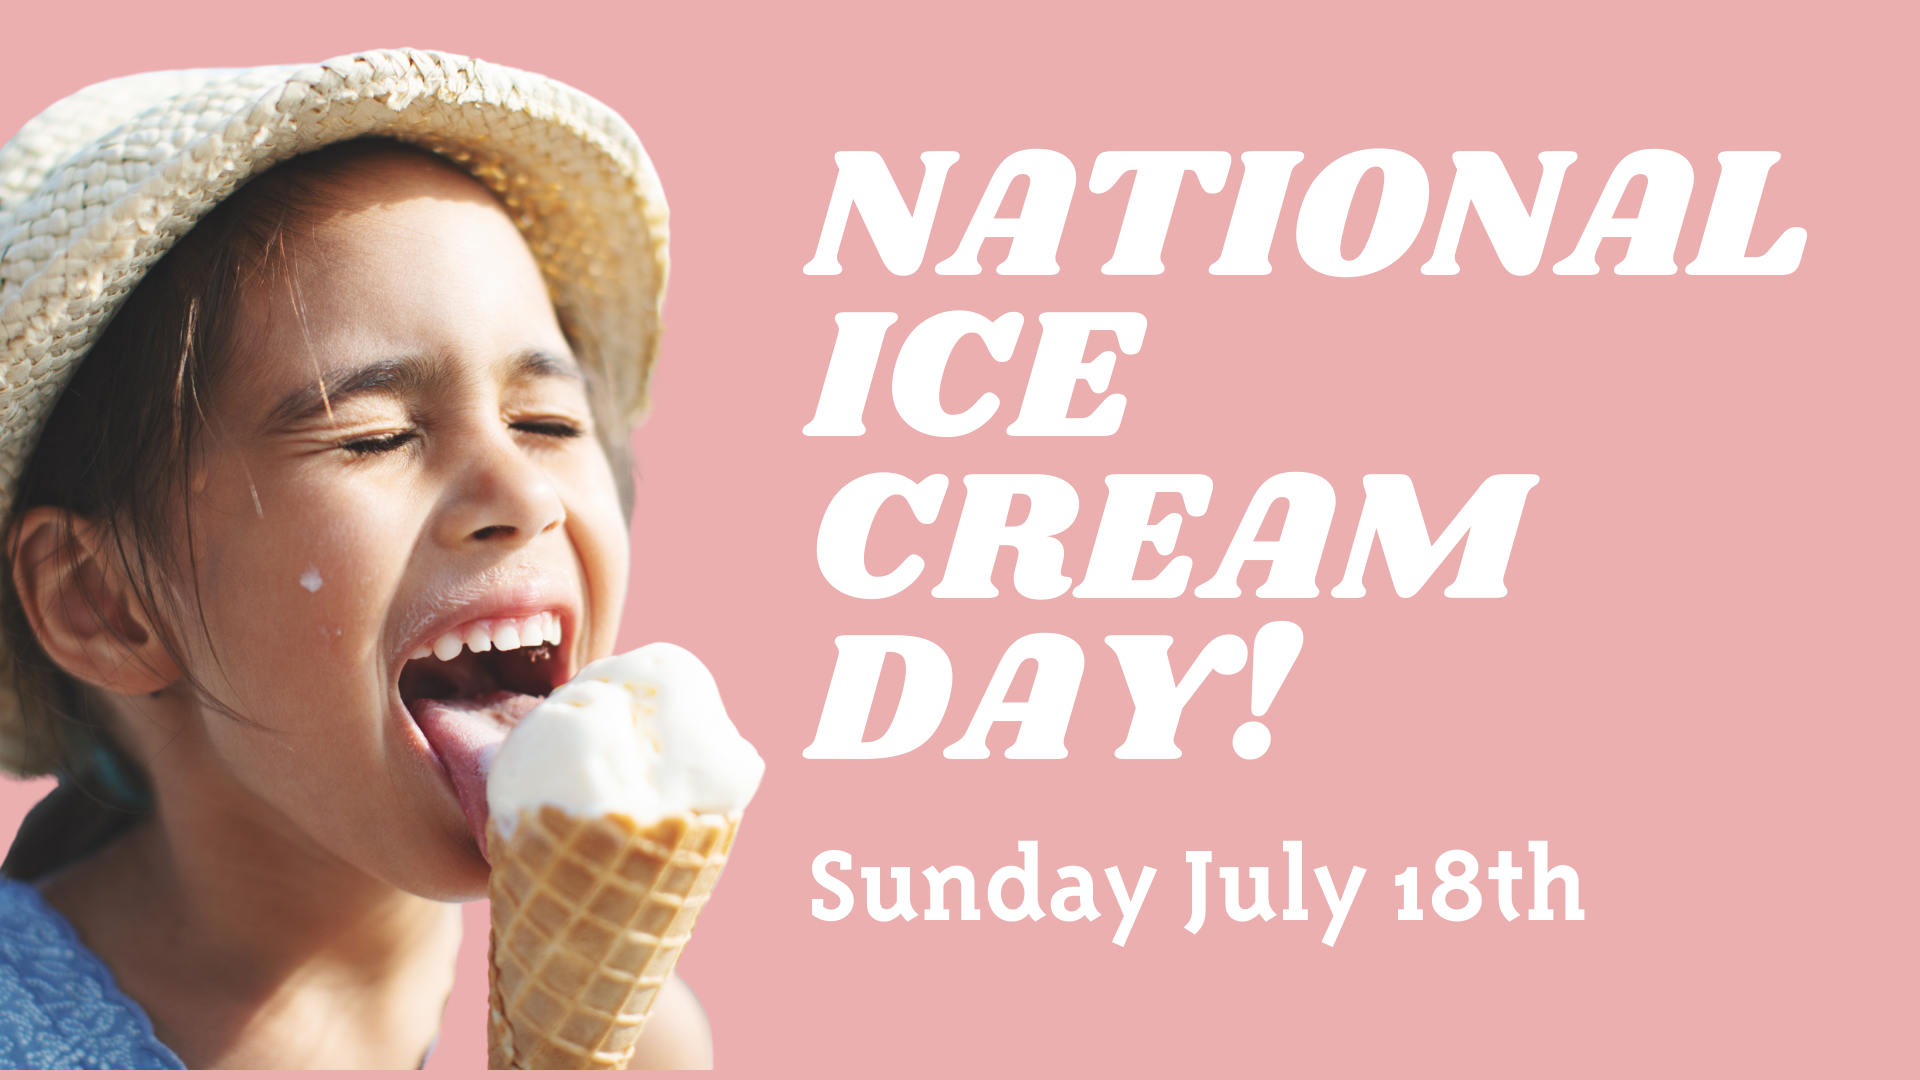 National Ice Cream Day Images National Ice Cream Day Third Sunday In